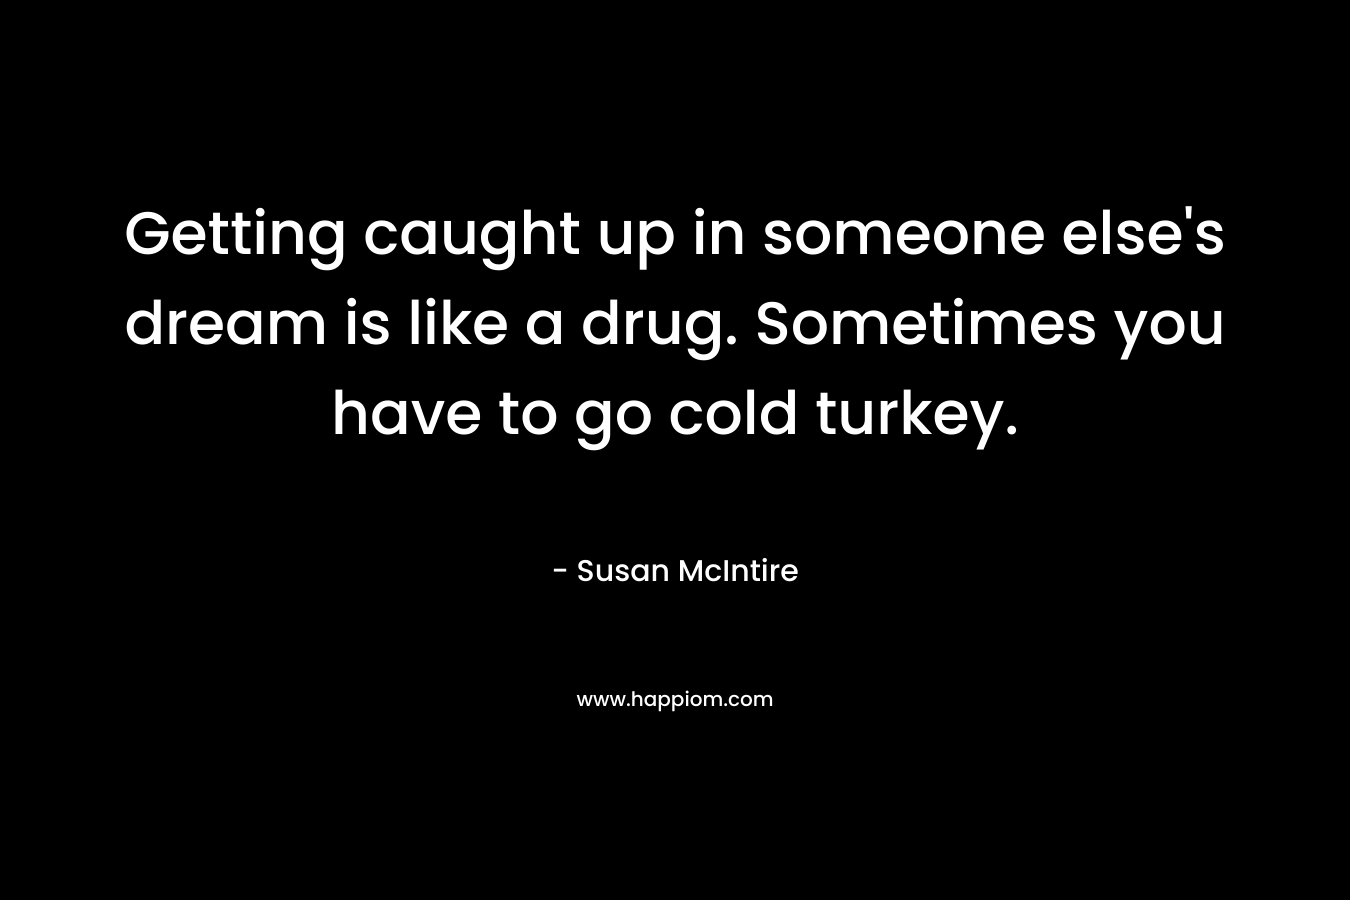 Getting caught up in someone else’s dream is like a drug. Sometimes you have to go cold turkey. – Susan McIntire